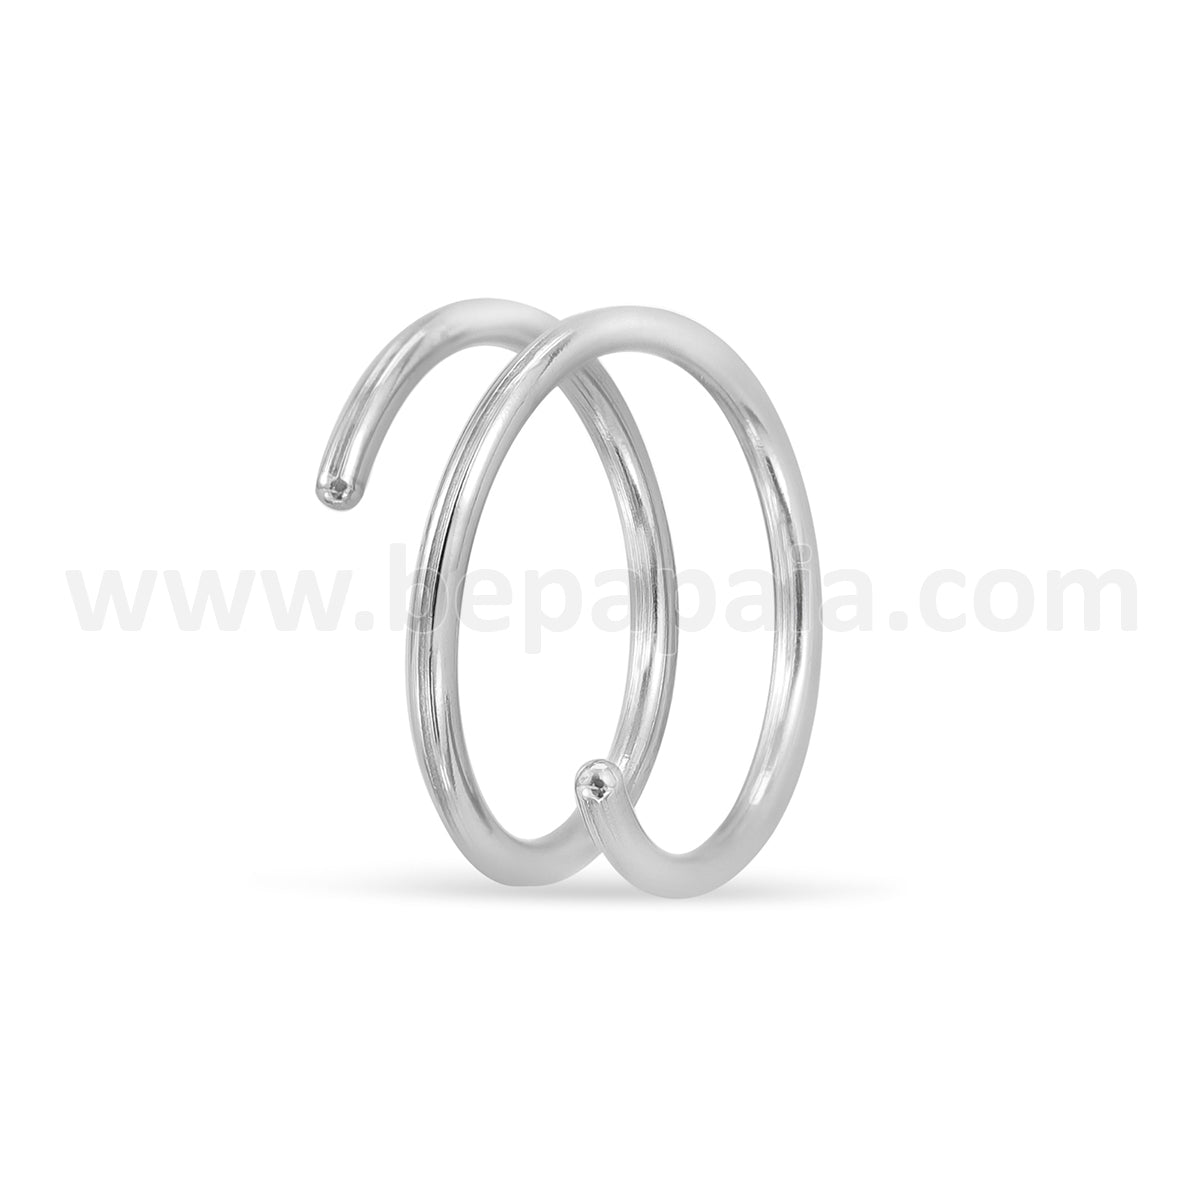 Surgical steel double spiral ring nose piercing